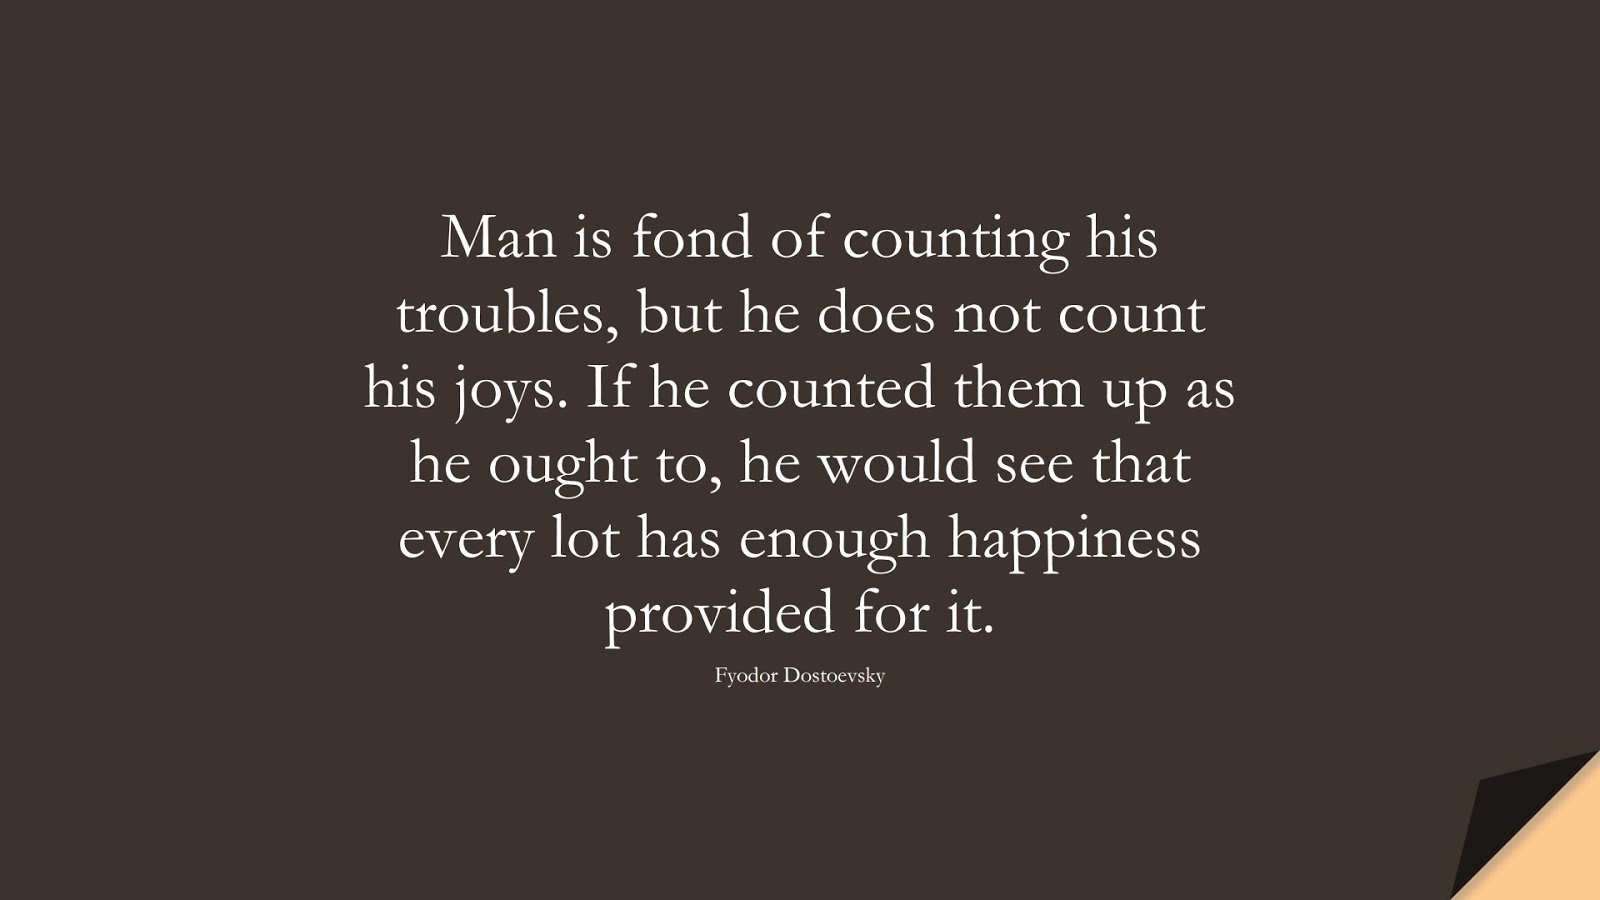 Man is fond of counting his troubles, but he does not count his joys. If he counted them up as he ought to, he would see that every lot has enough happiness provided for it. (Fyodor Dostoevsky);  #HappinessQuotes